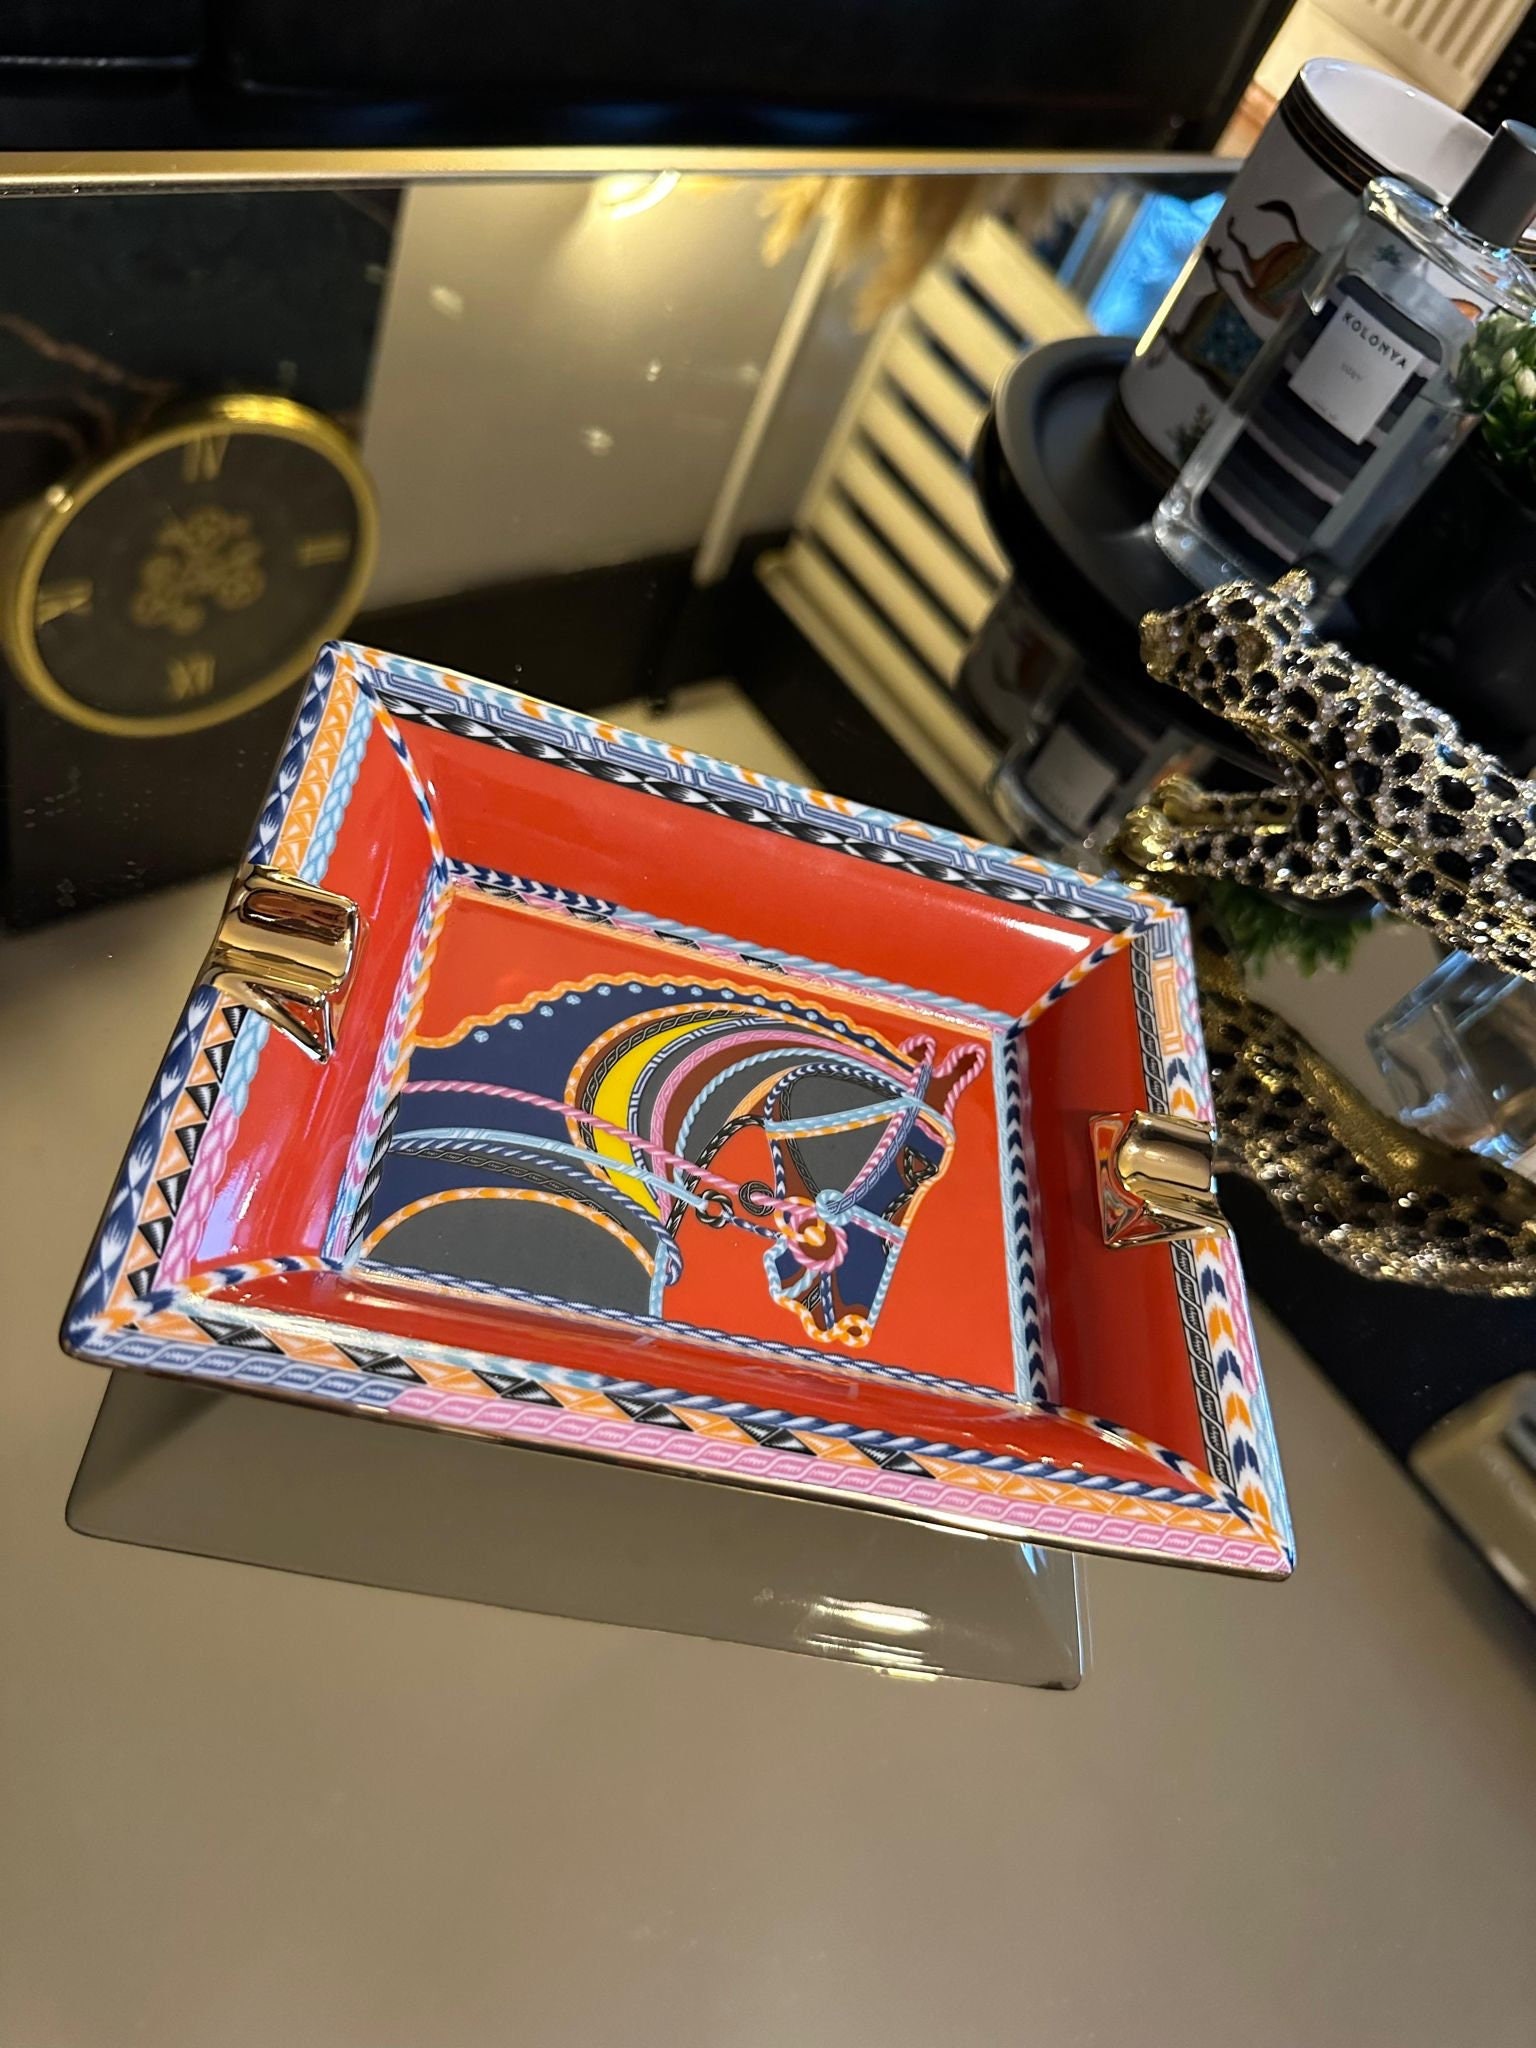 Hermès Tigre Royal Change Tray Available For Immediate Sale At